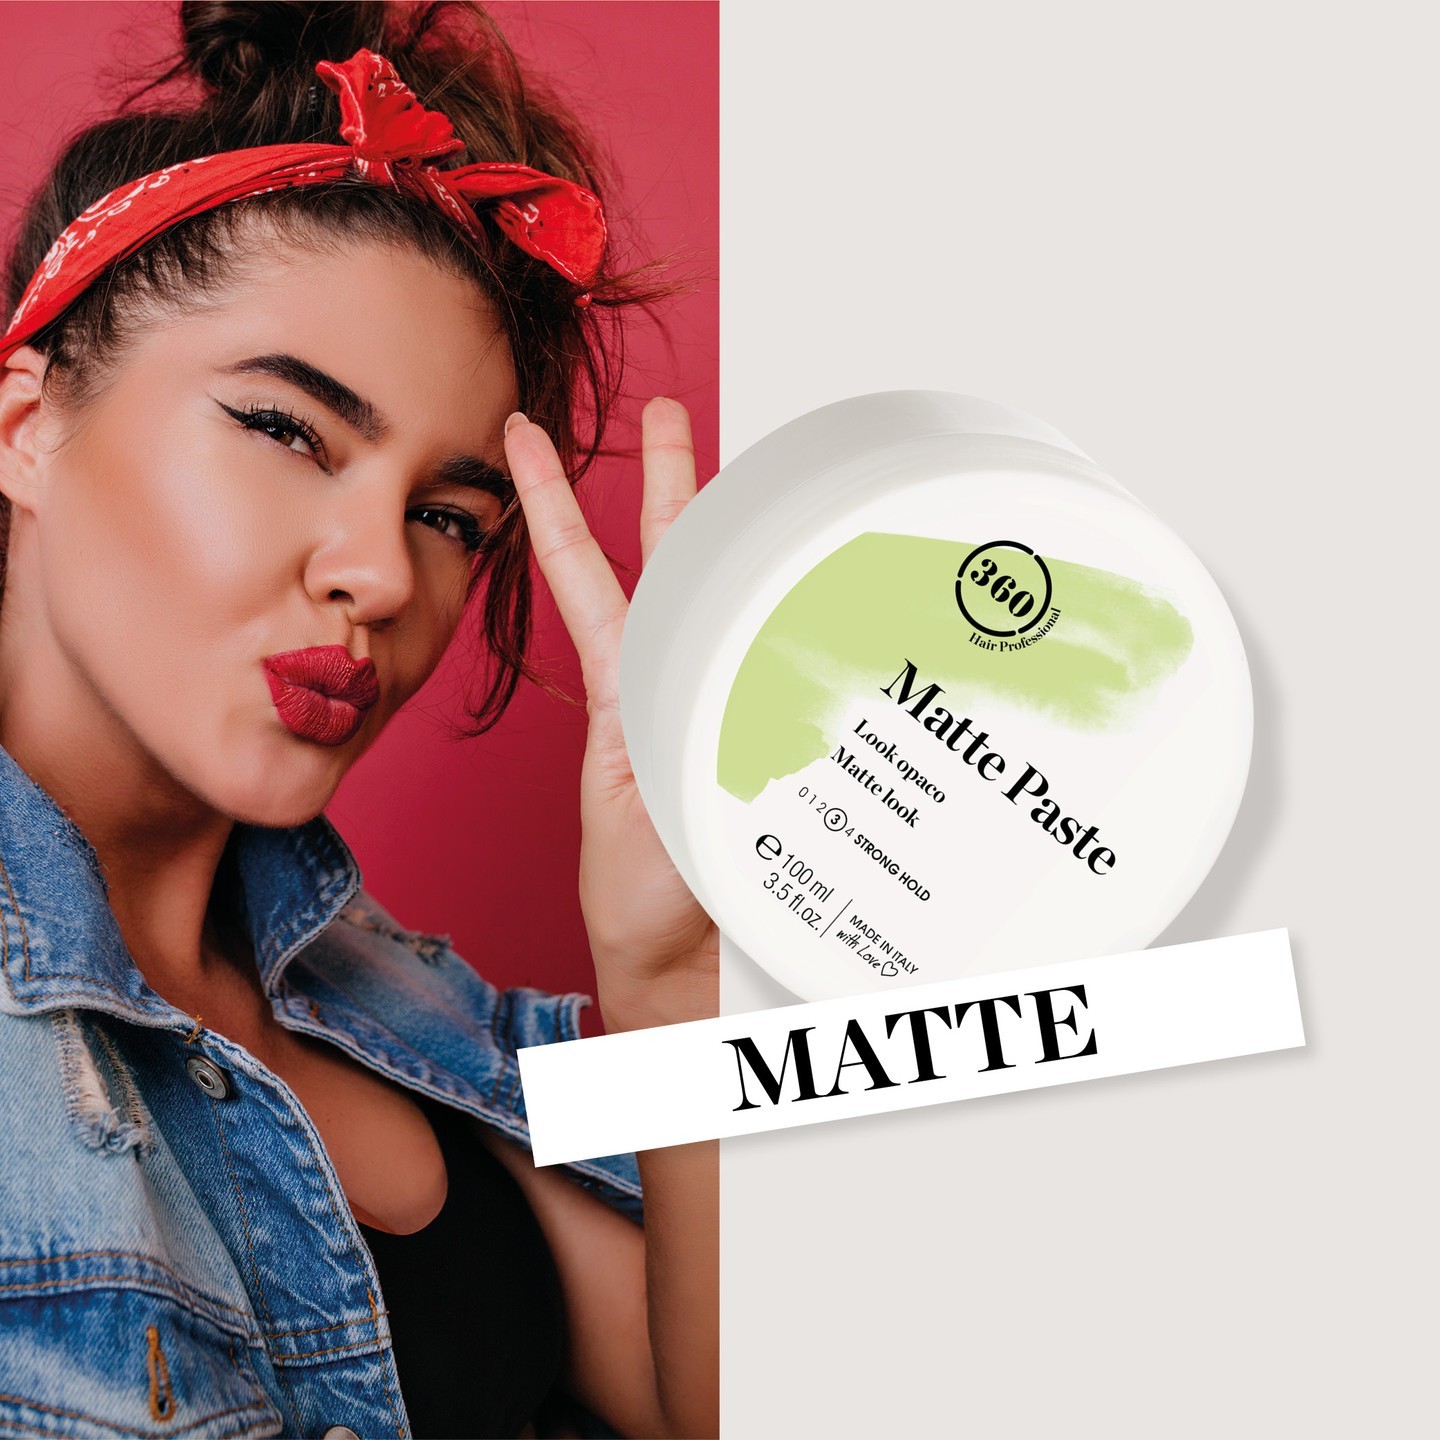 Texture and control with a glam effect… this is our MATTE paste!
.
.
.
Texture e tenuta con un effetto glam, grazie alla pasta opaca MATTE di 360!
.
.
.
#360hair #360hairprofessional
#360hairproducts
#madeinitalywithlove